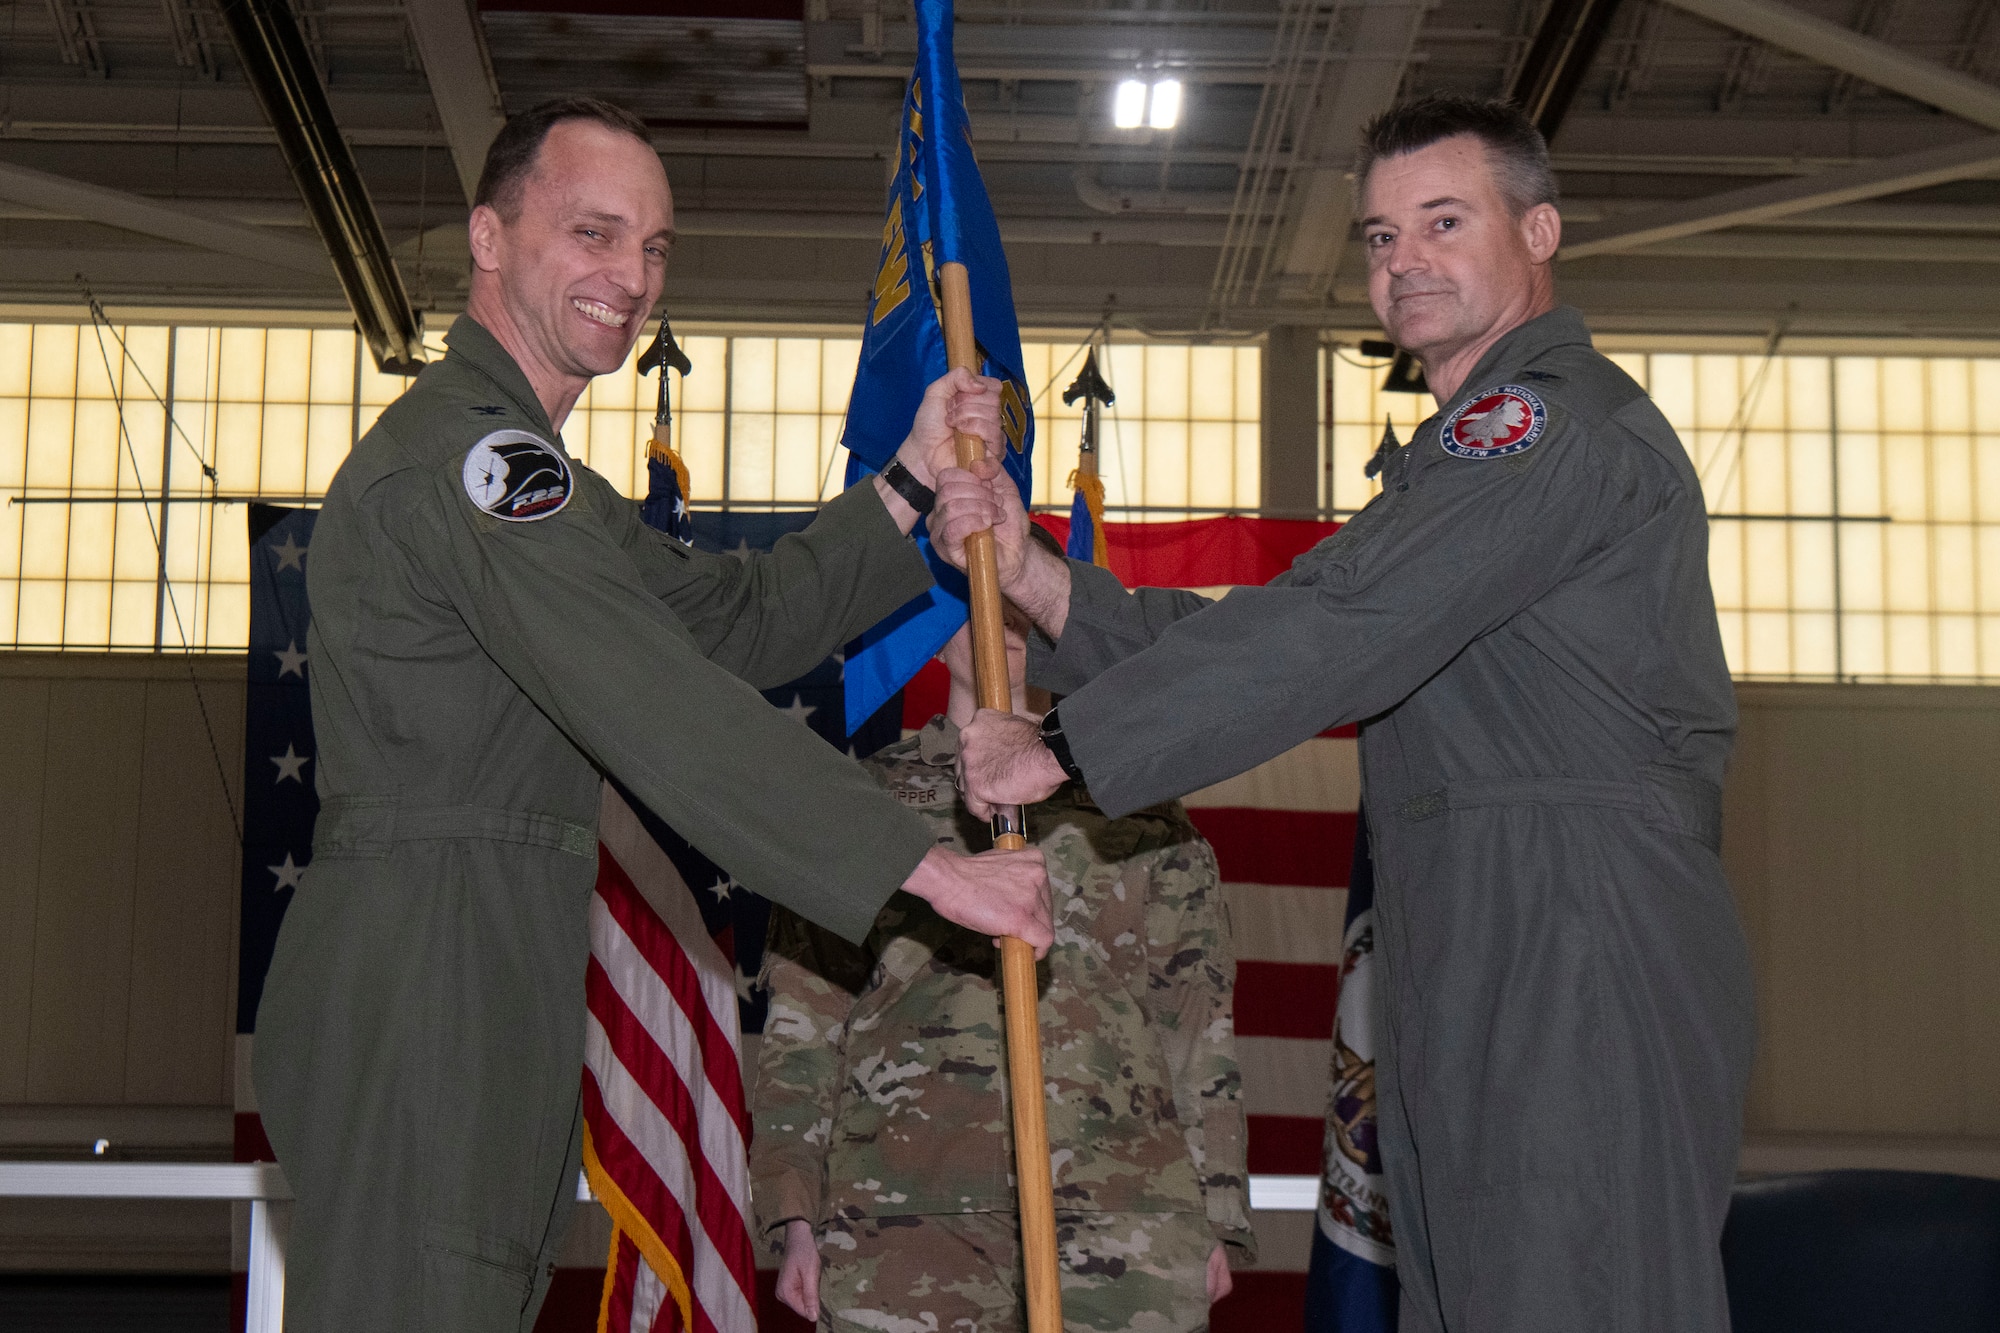 Two Air Force officers holding a guidon, smiling for photo